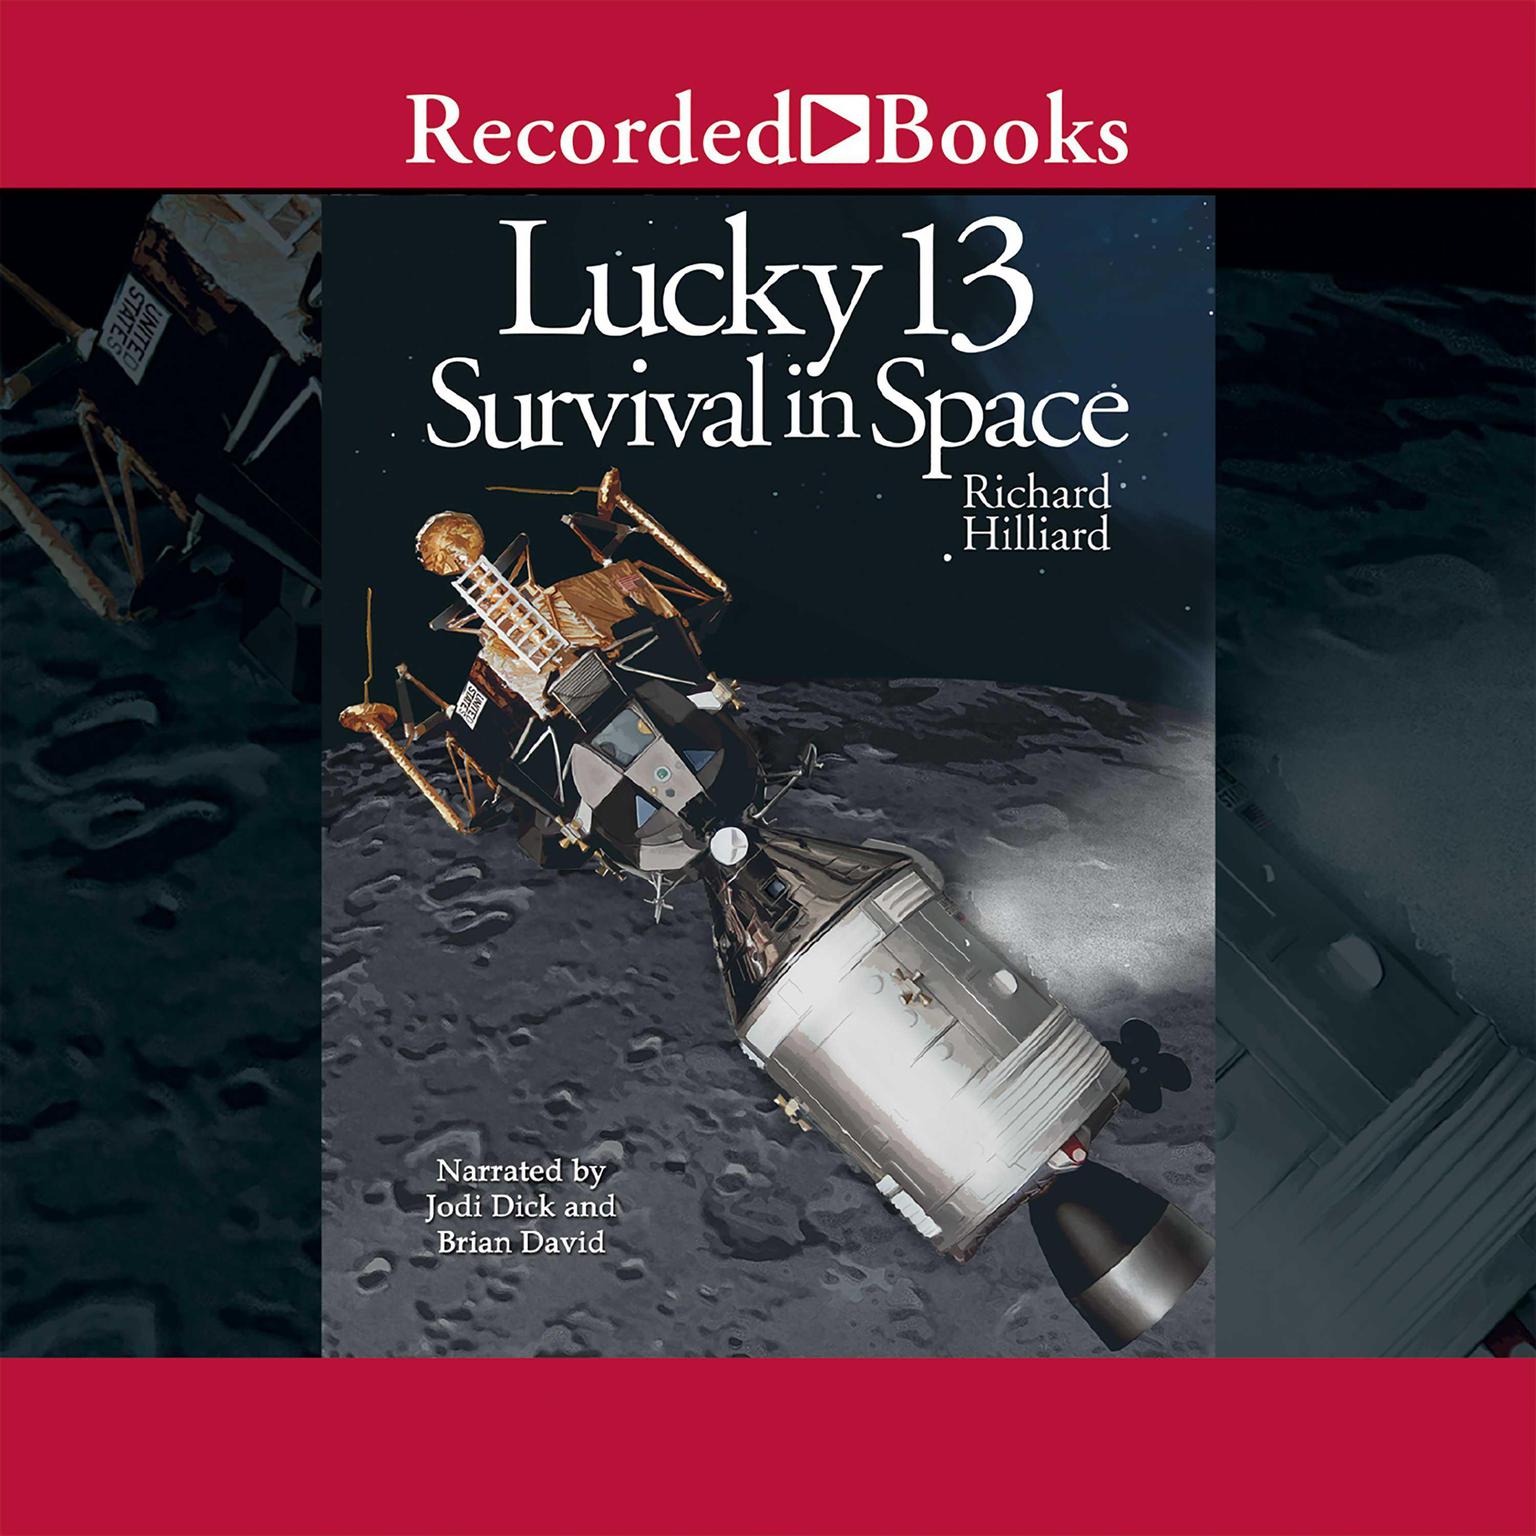 Lucky 13: Survival in Space Audiobook, by Richard Hilliard